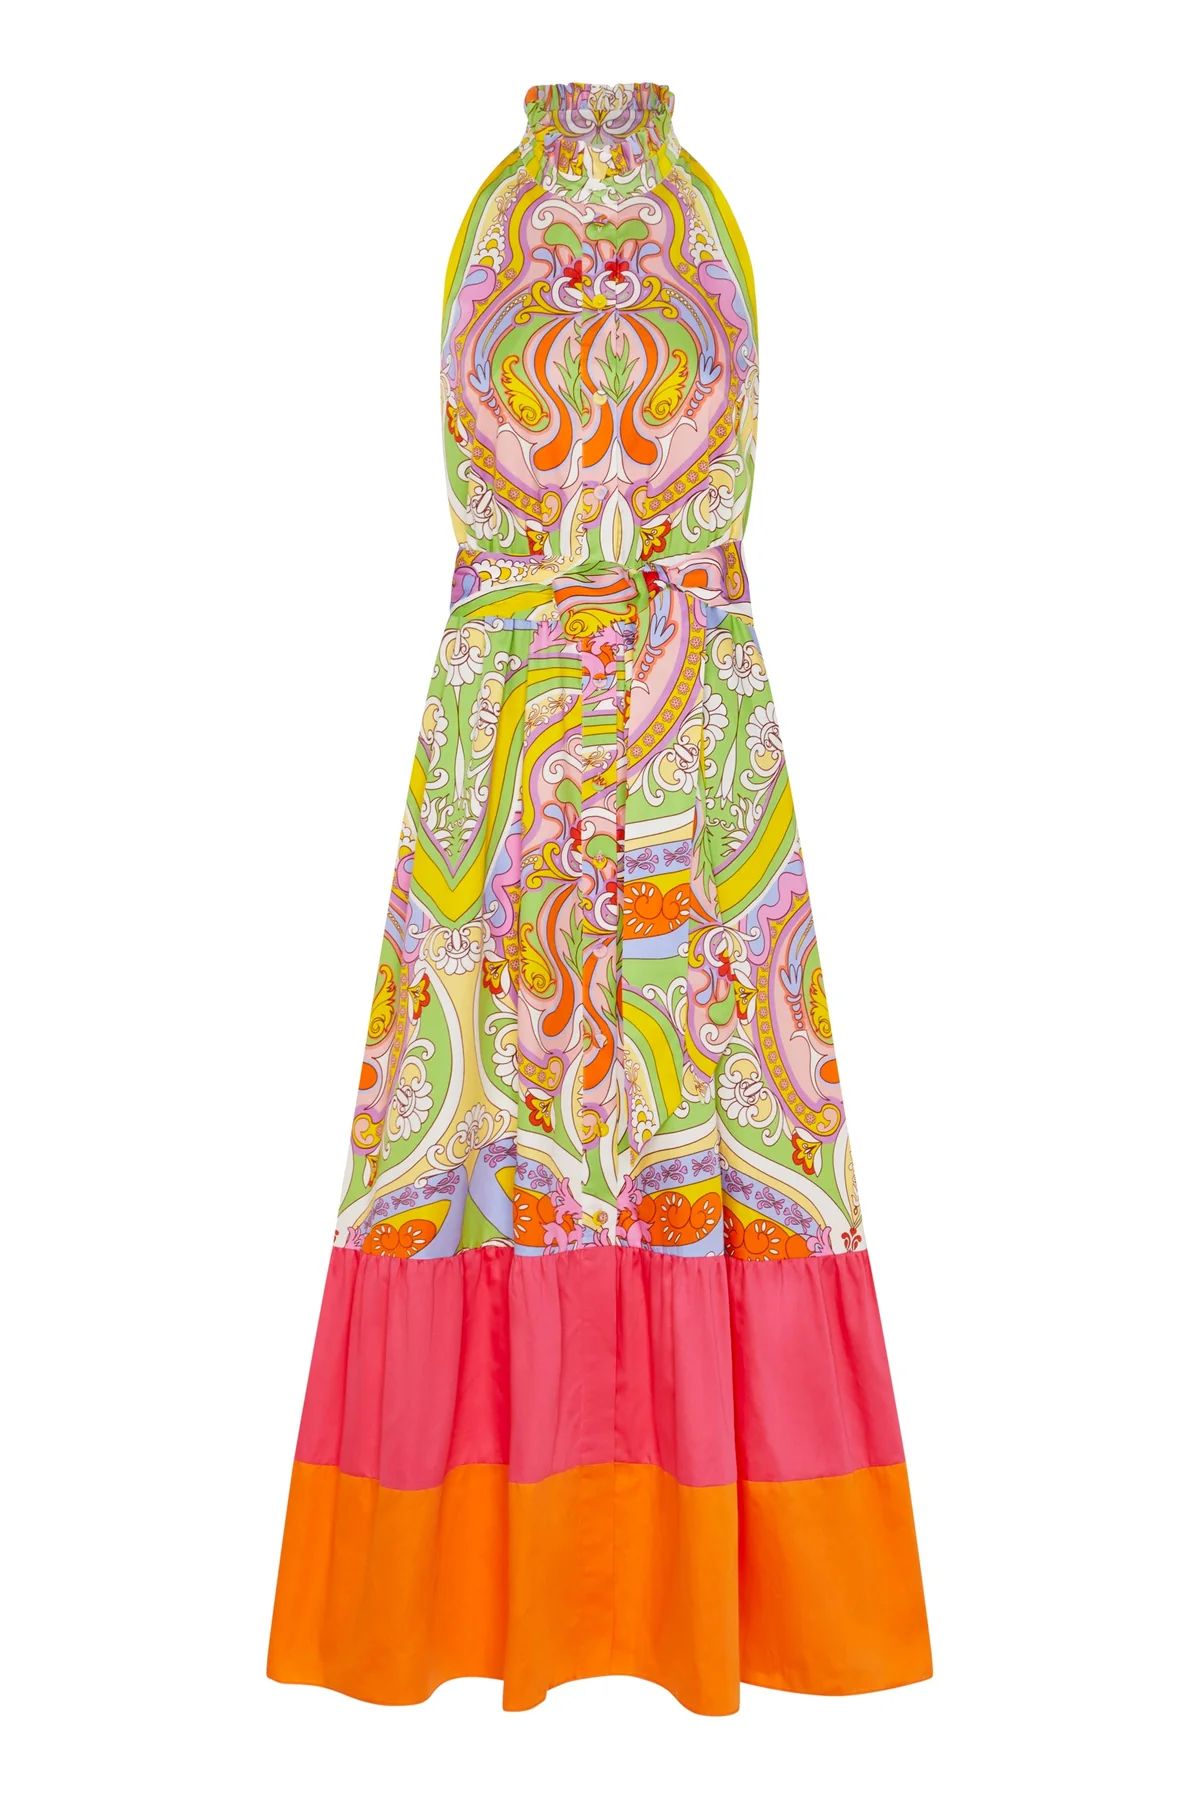 Biba Cotton Maxi Dress in Bia Pink | Over The Moon